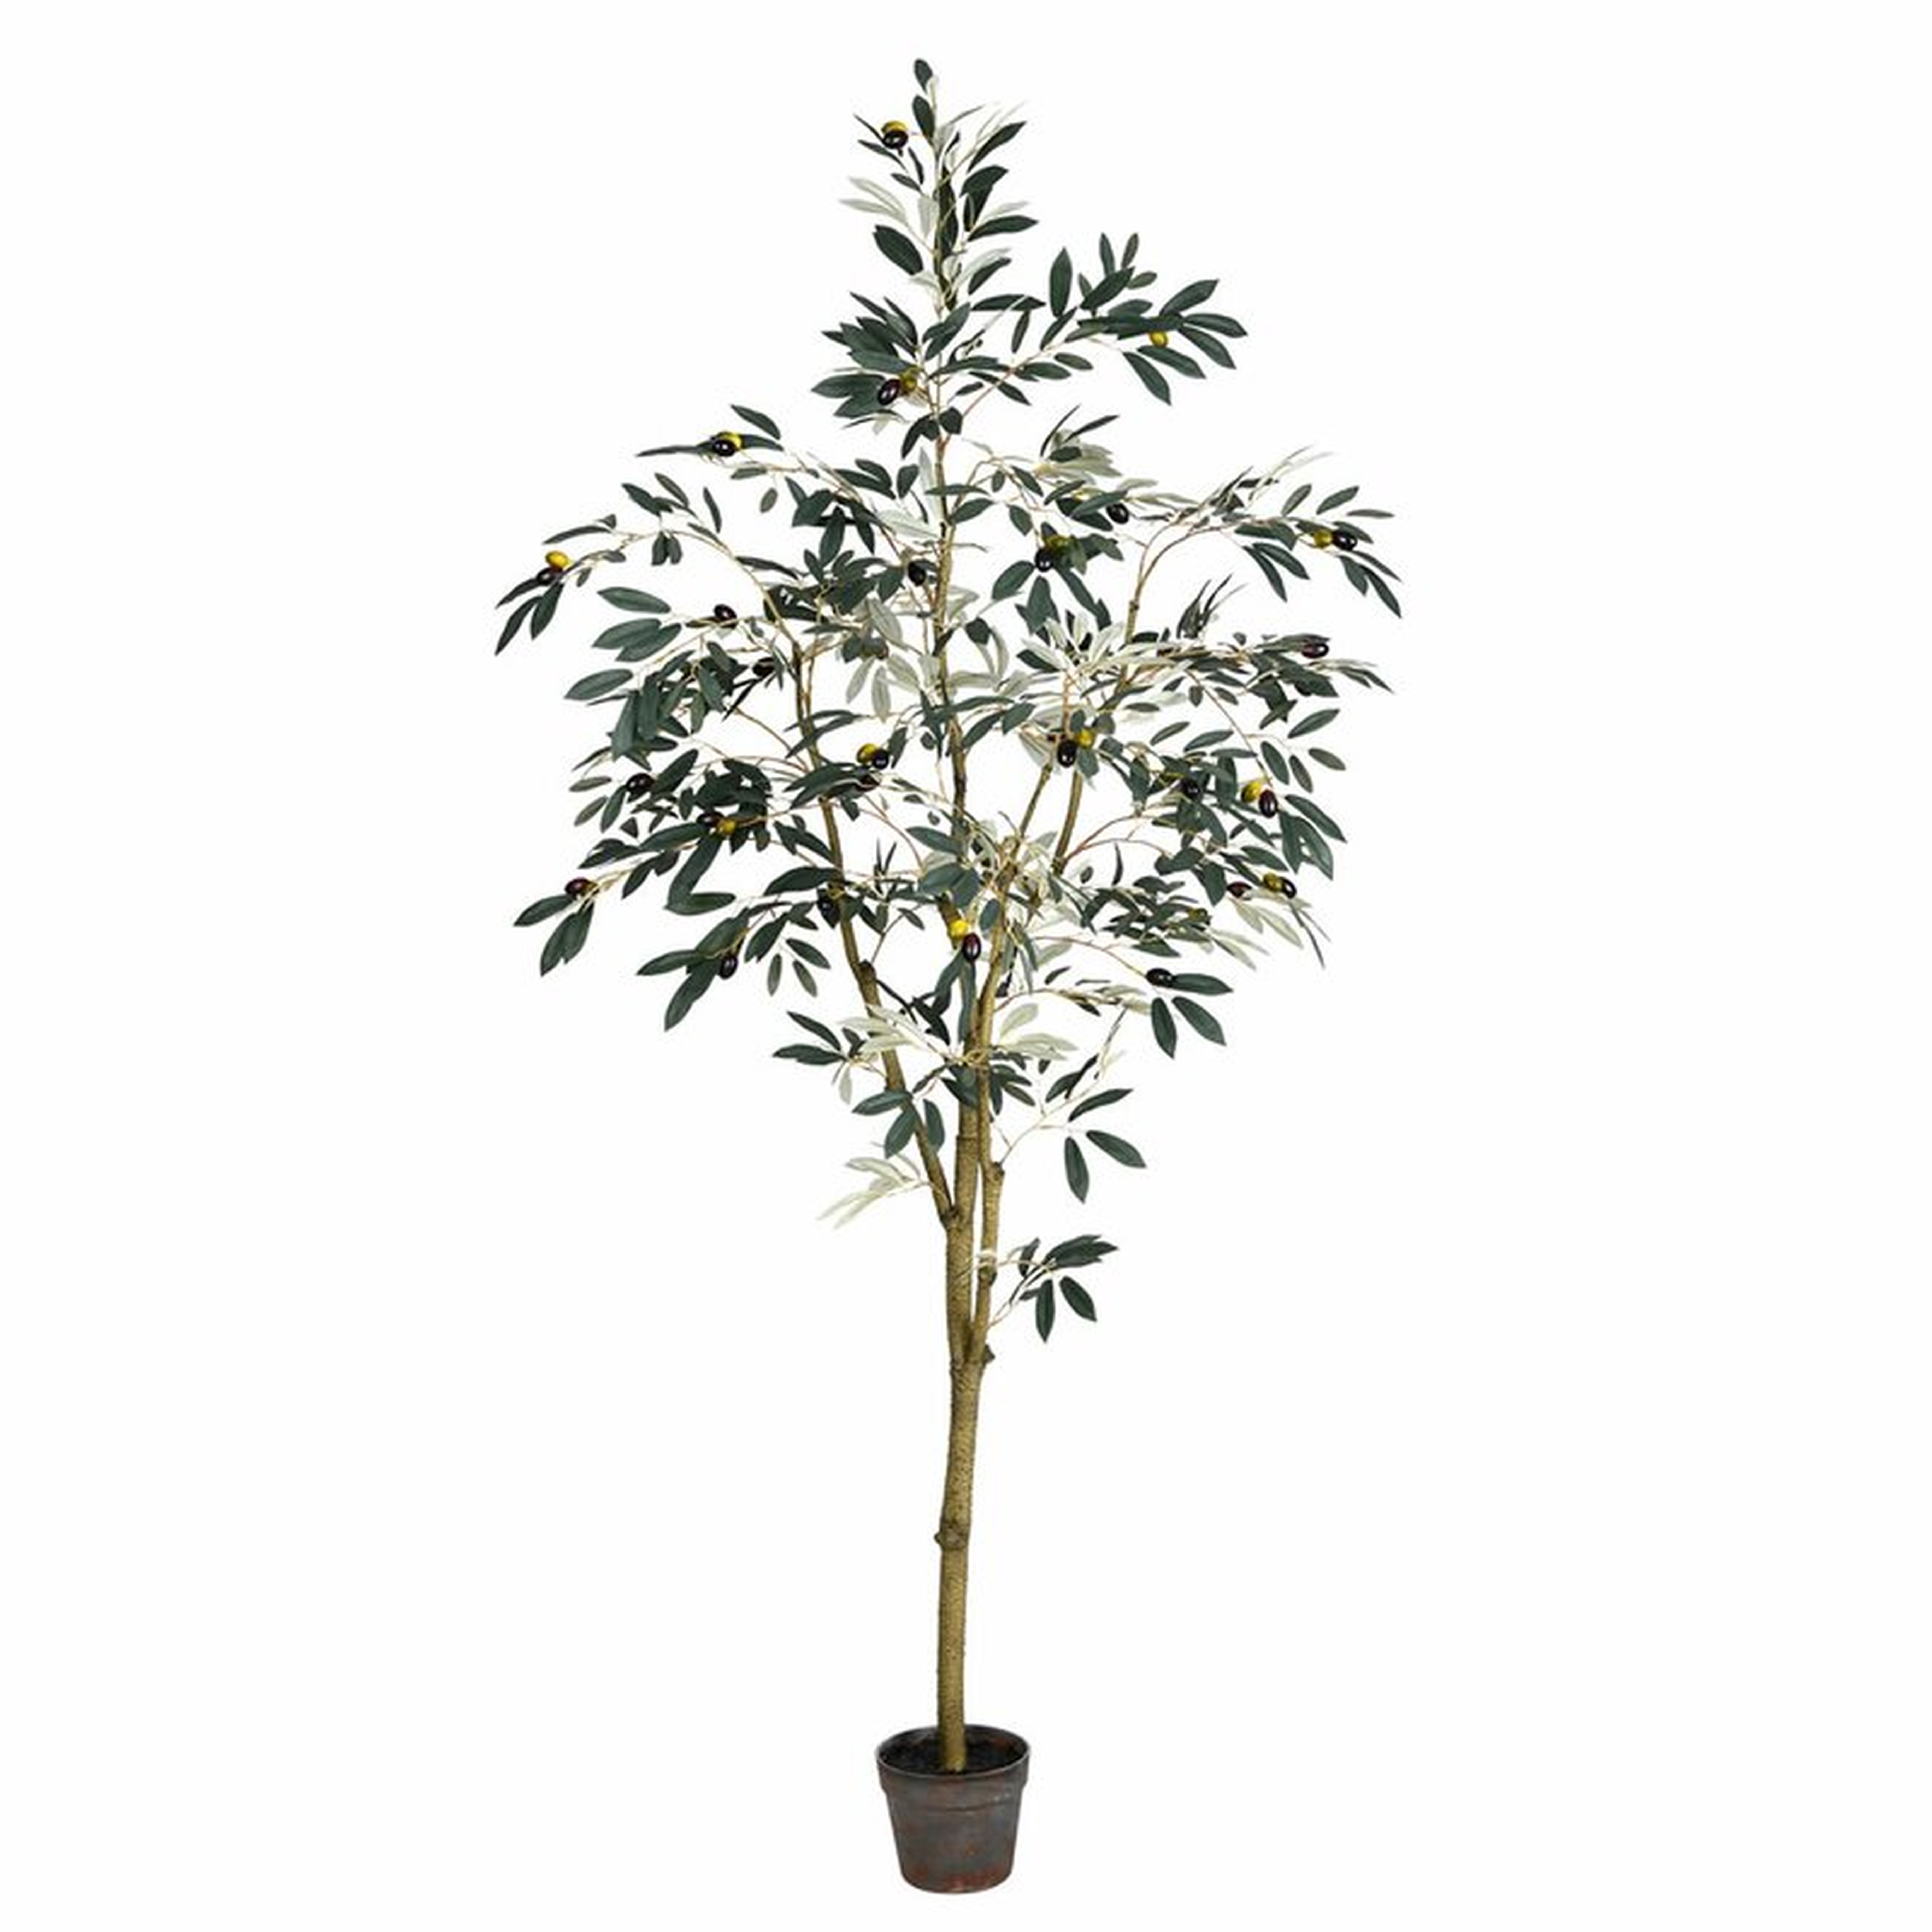 Artificial Potted Olive Floor Foliage Tree in Pot - Wayfair